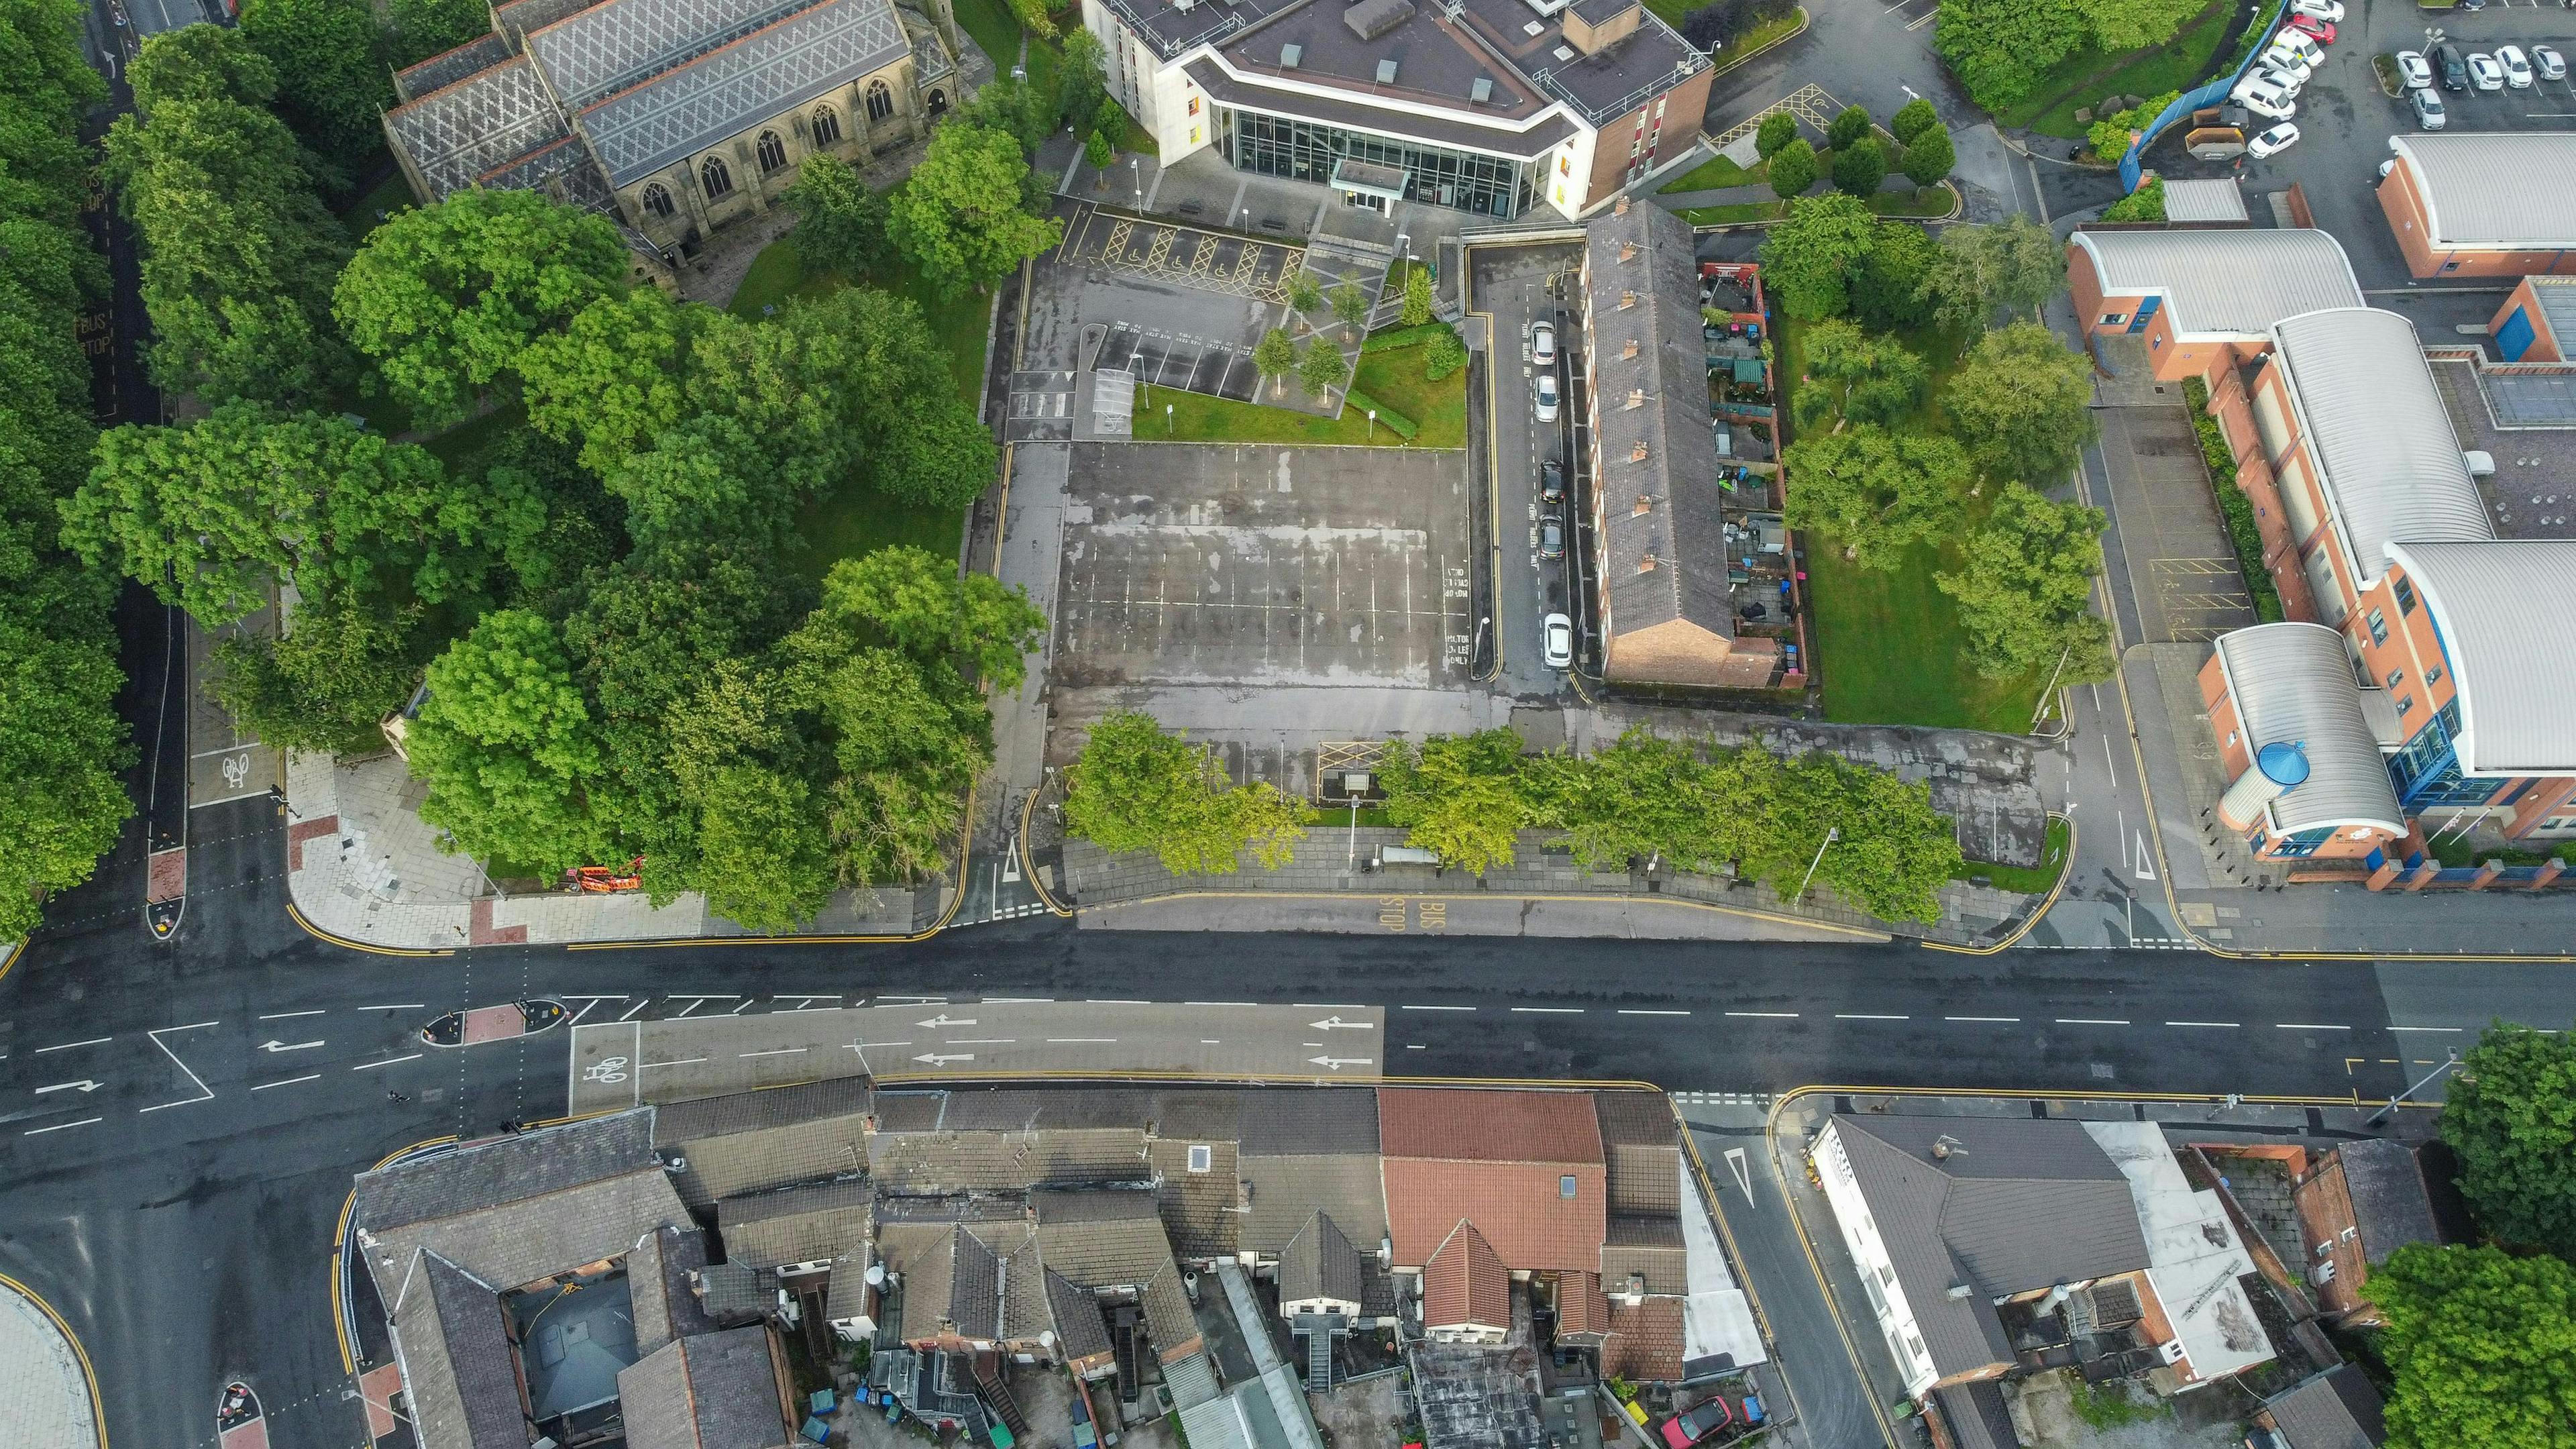 Aerial image of a street and buildings where only the rooftops are visible.